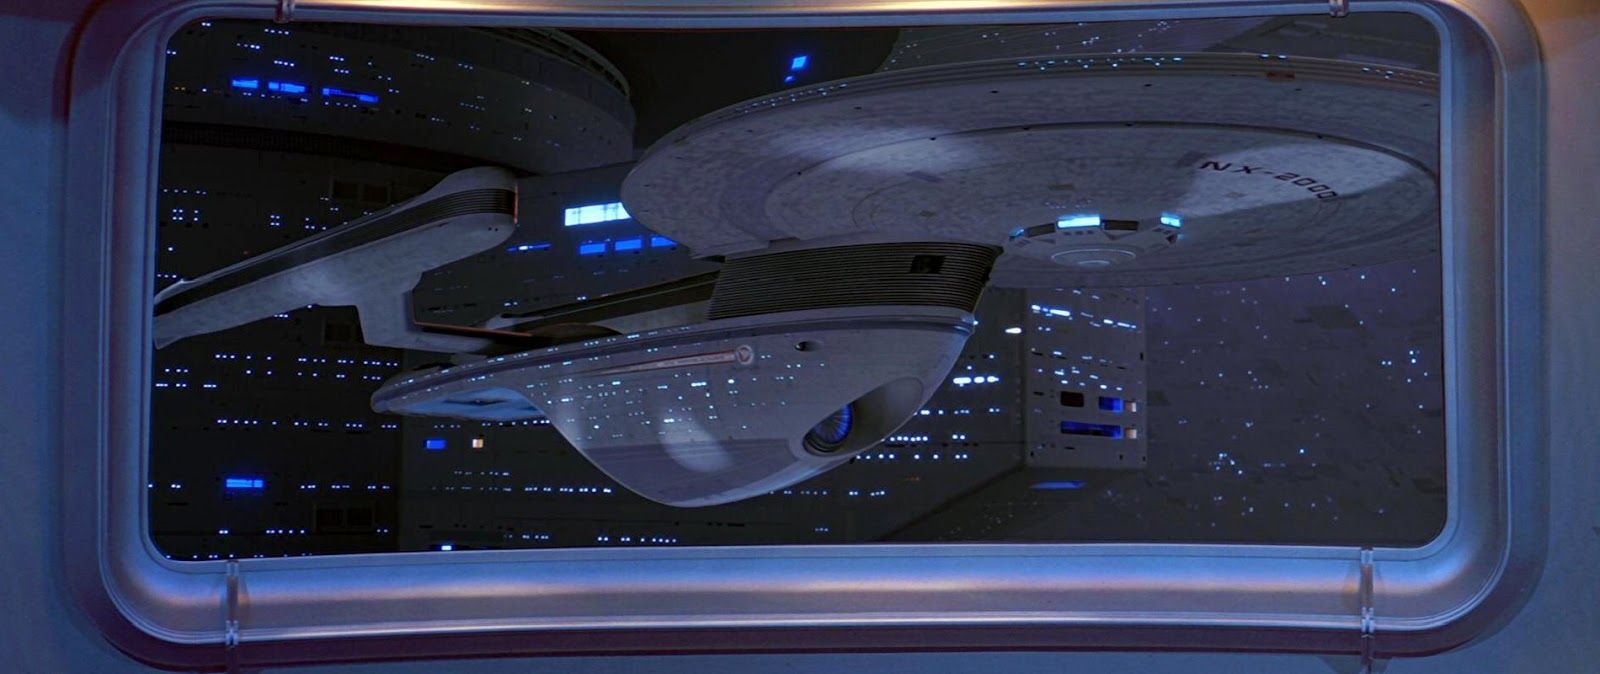 A picture of Star Trek's USS Excelsior in space dock is shown.